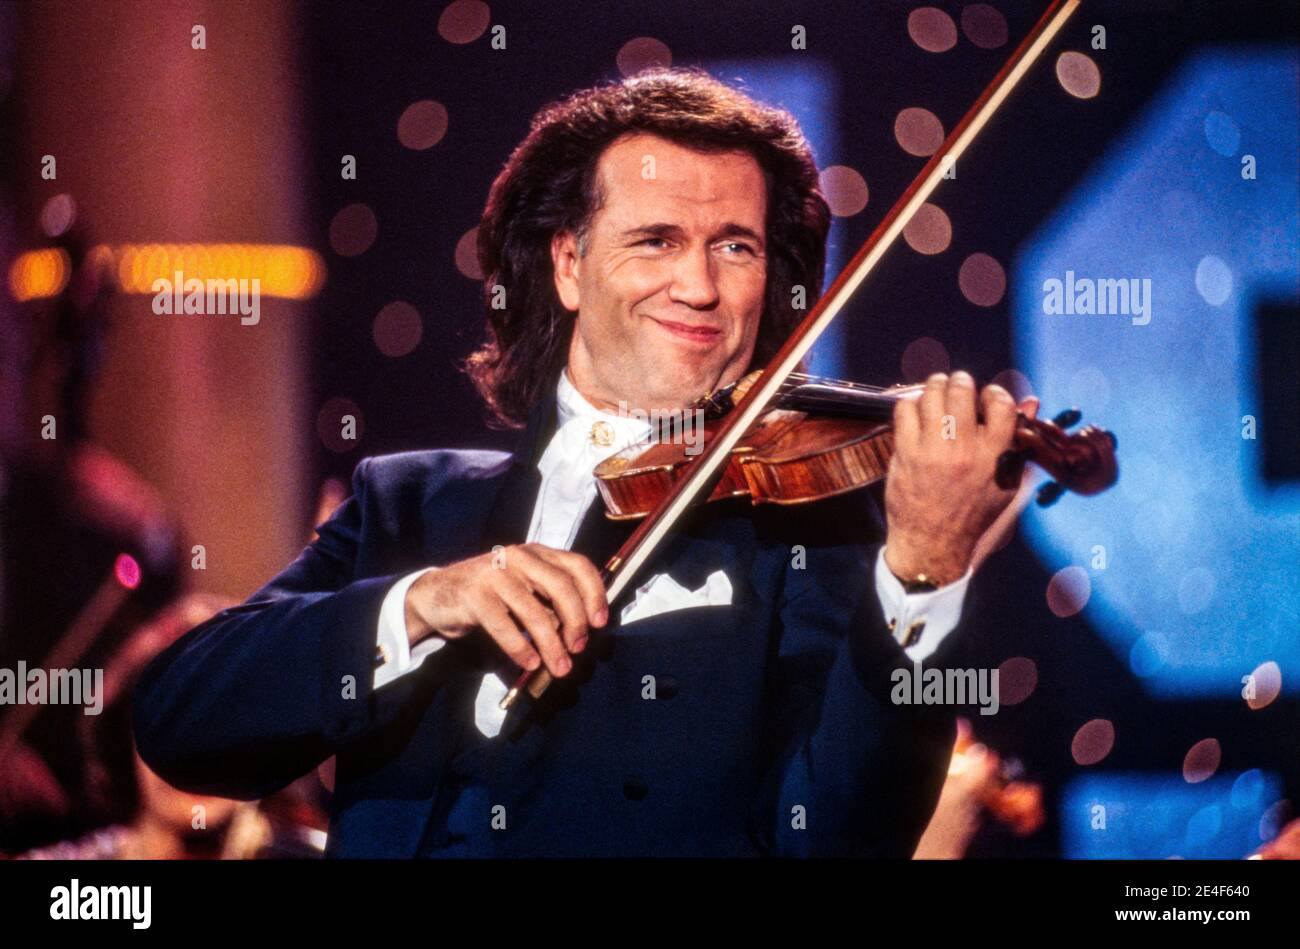 HILVERSUM, THE NETHERLANDS - 04 APR, 1995 - Andre Rieu is a Dutch violinist and conductor best known for creating the waltz-playing Johann Strauss Orc Stock Photo